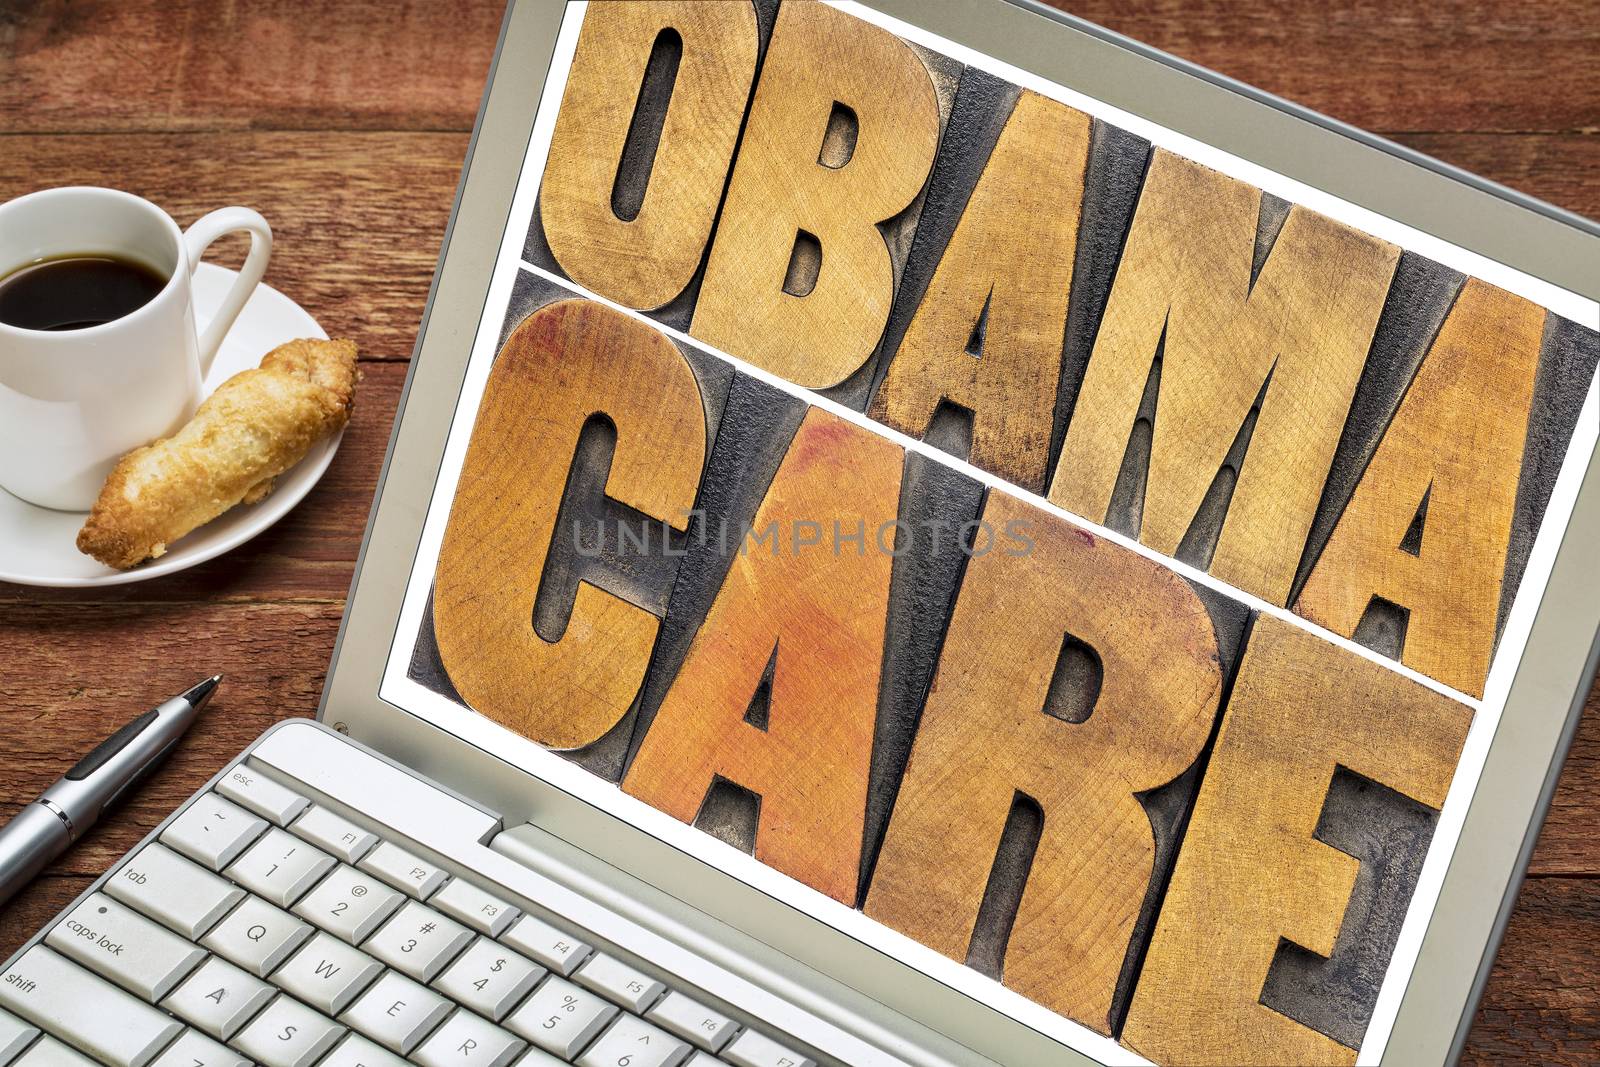 obamacare typography on laptop screen by PixelsAway